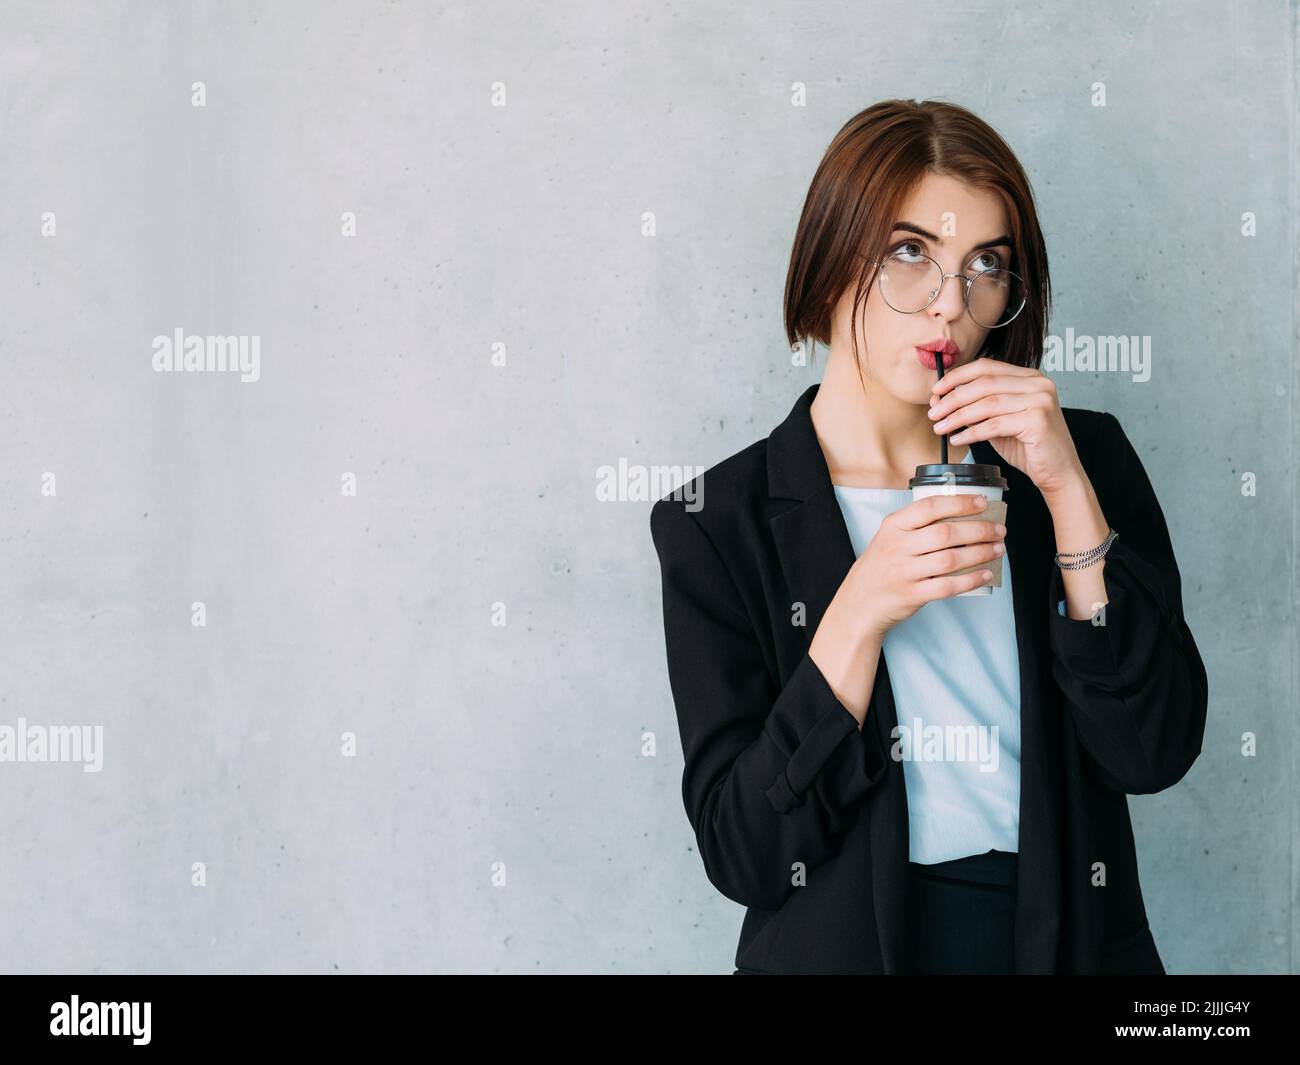 corporate worker break young woman coffee Stock Photo